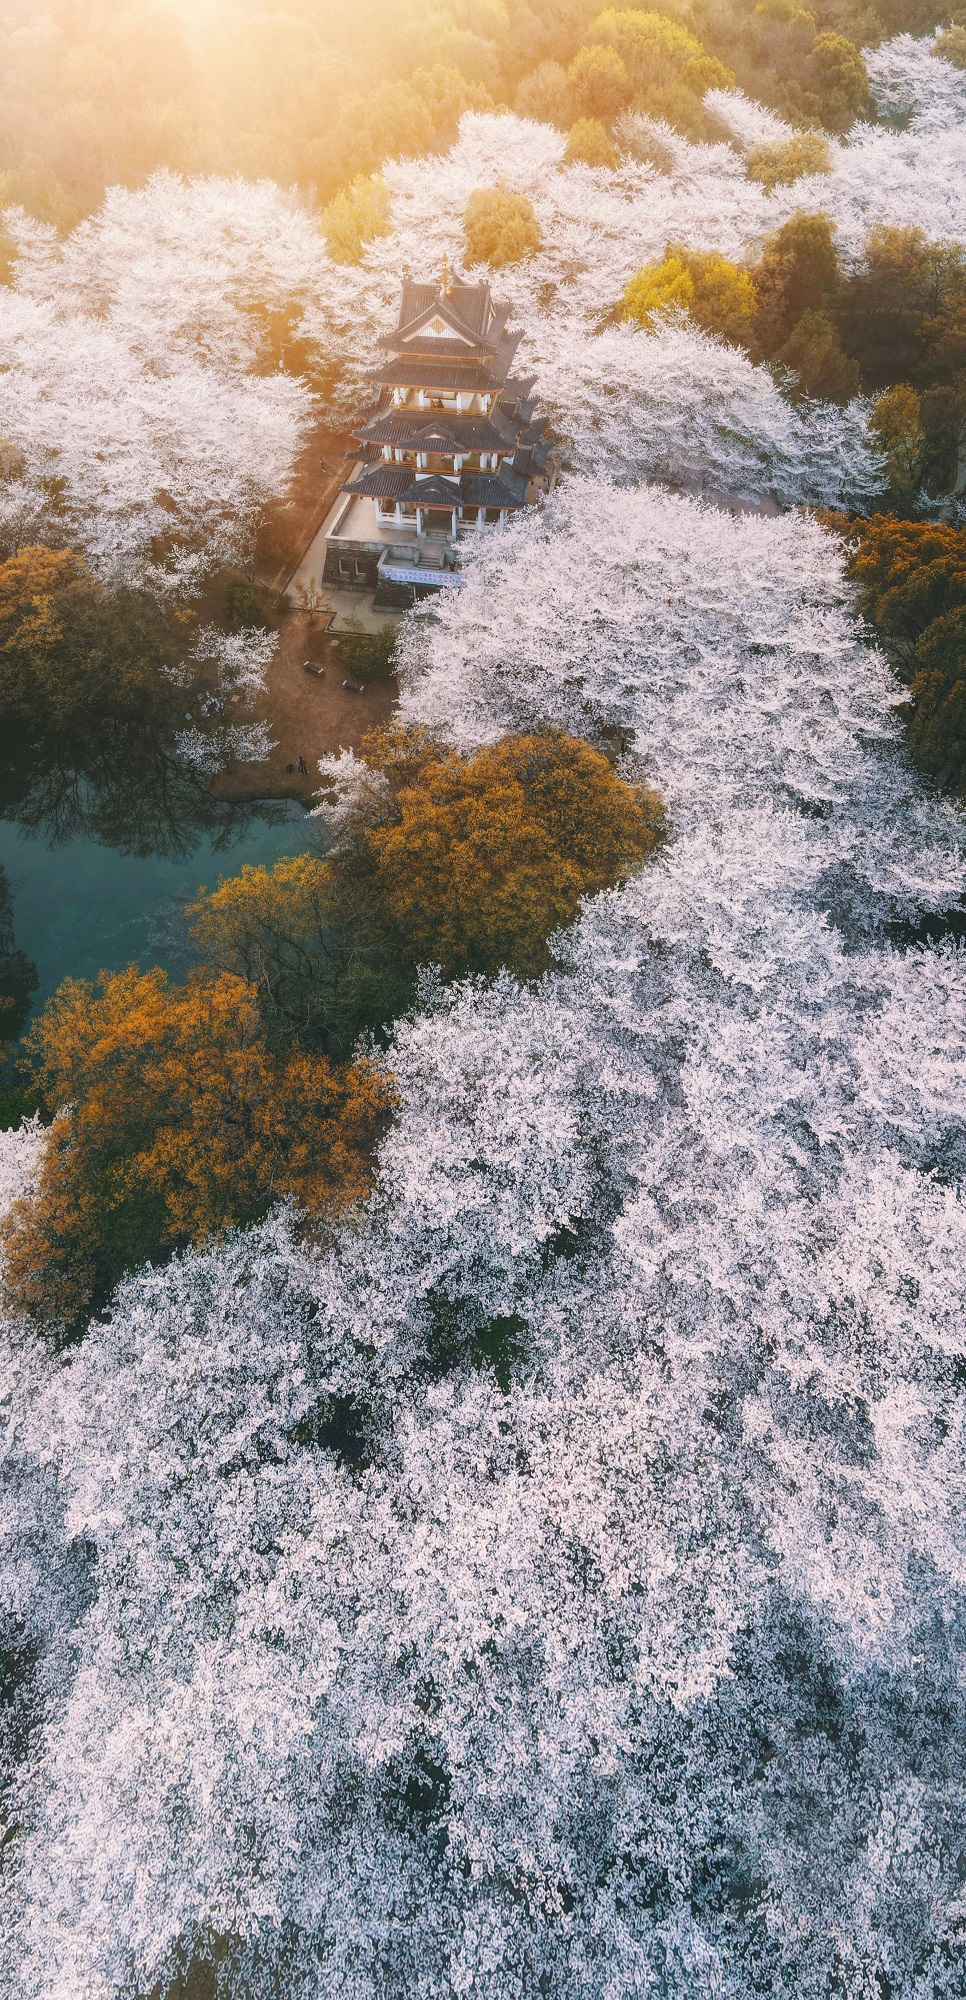 Wuxi's cherry blossom season elevated by helicopter tours and global connections